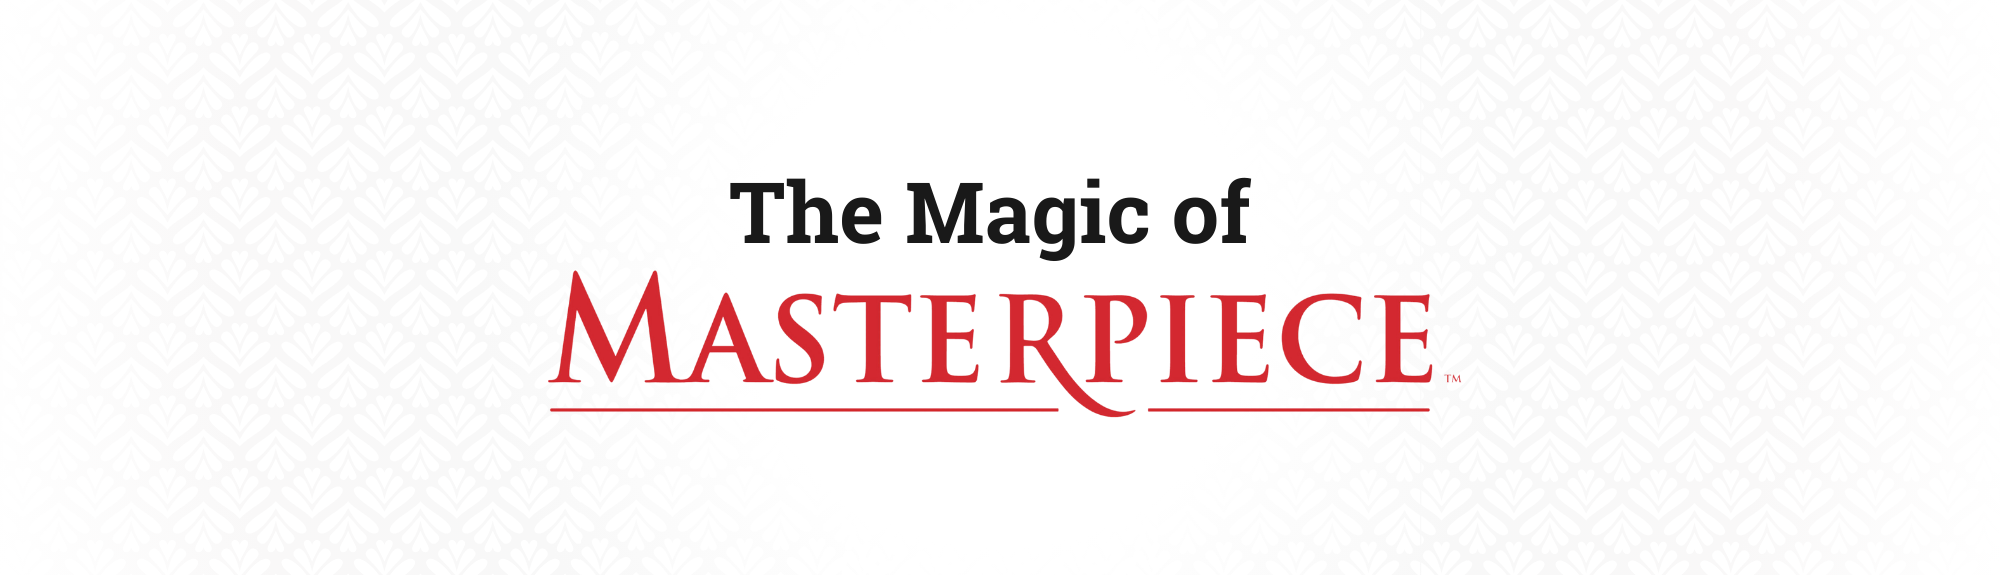 "The Magic of Masterpiece" text on white background